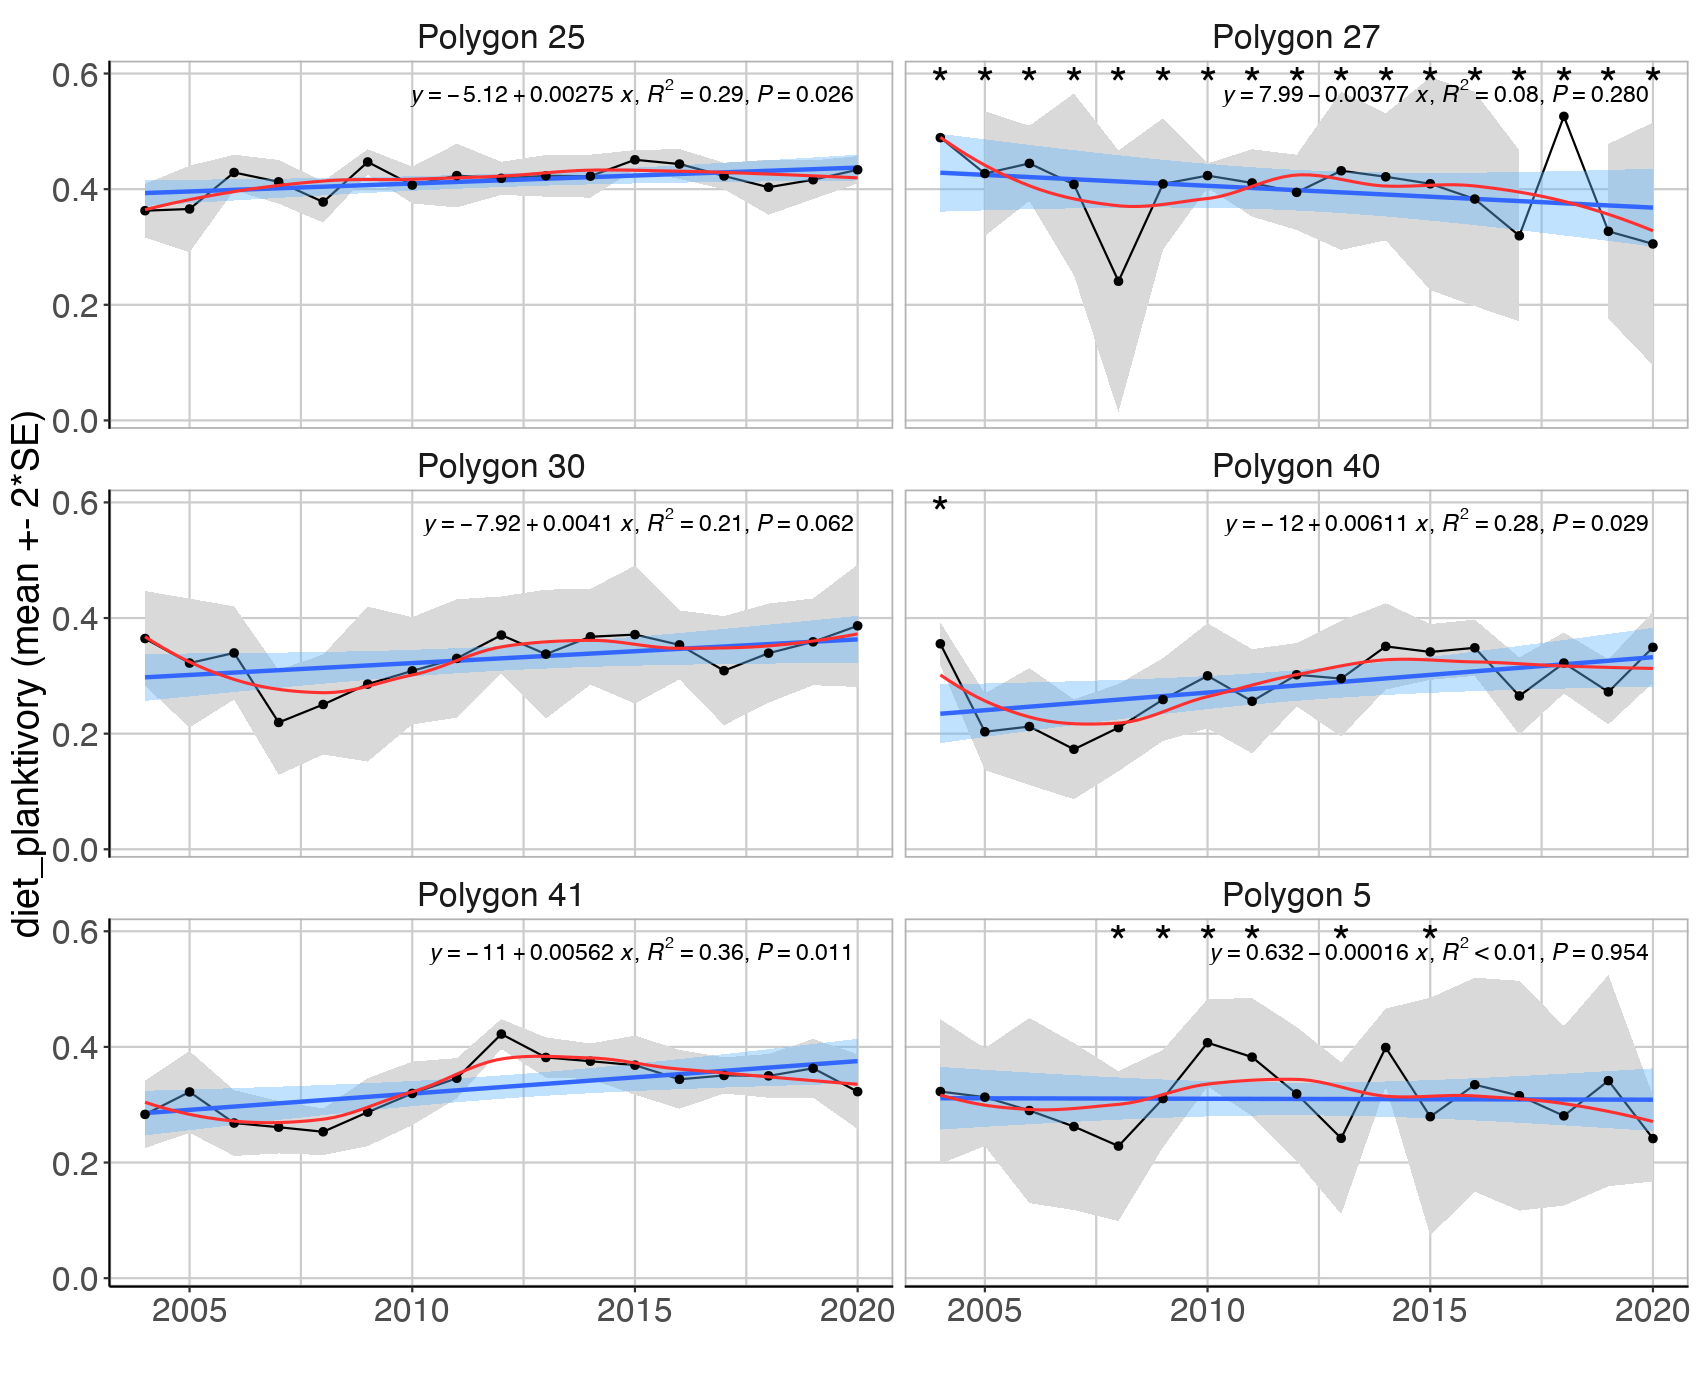 Figure S.3.5. Mean ( ± 2*SE) biomass proportion of the planktivorous feeding guilds in the Sub-Arctic Barents Sea (Black dots and grey shading). Linear regression fit with 95% CI is shown in blue, and the statistical results are given in the top of each plot. A local smoother is added in red to assist visual interpretation of non-linear changes during the period. Stars indicate years with low sample size (< 5 trawls).